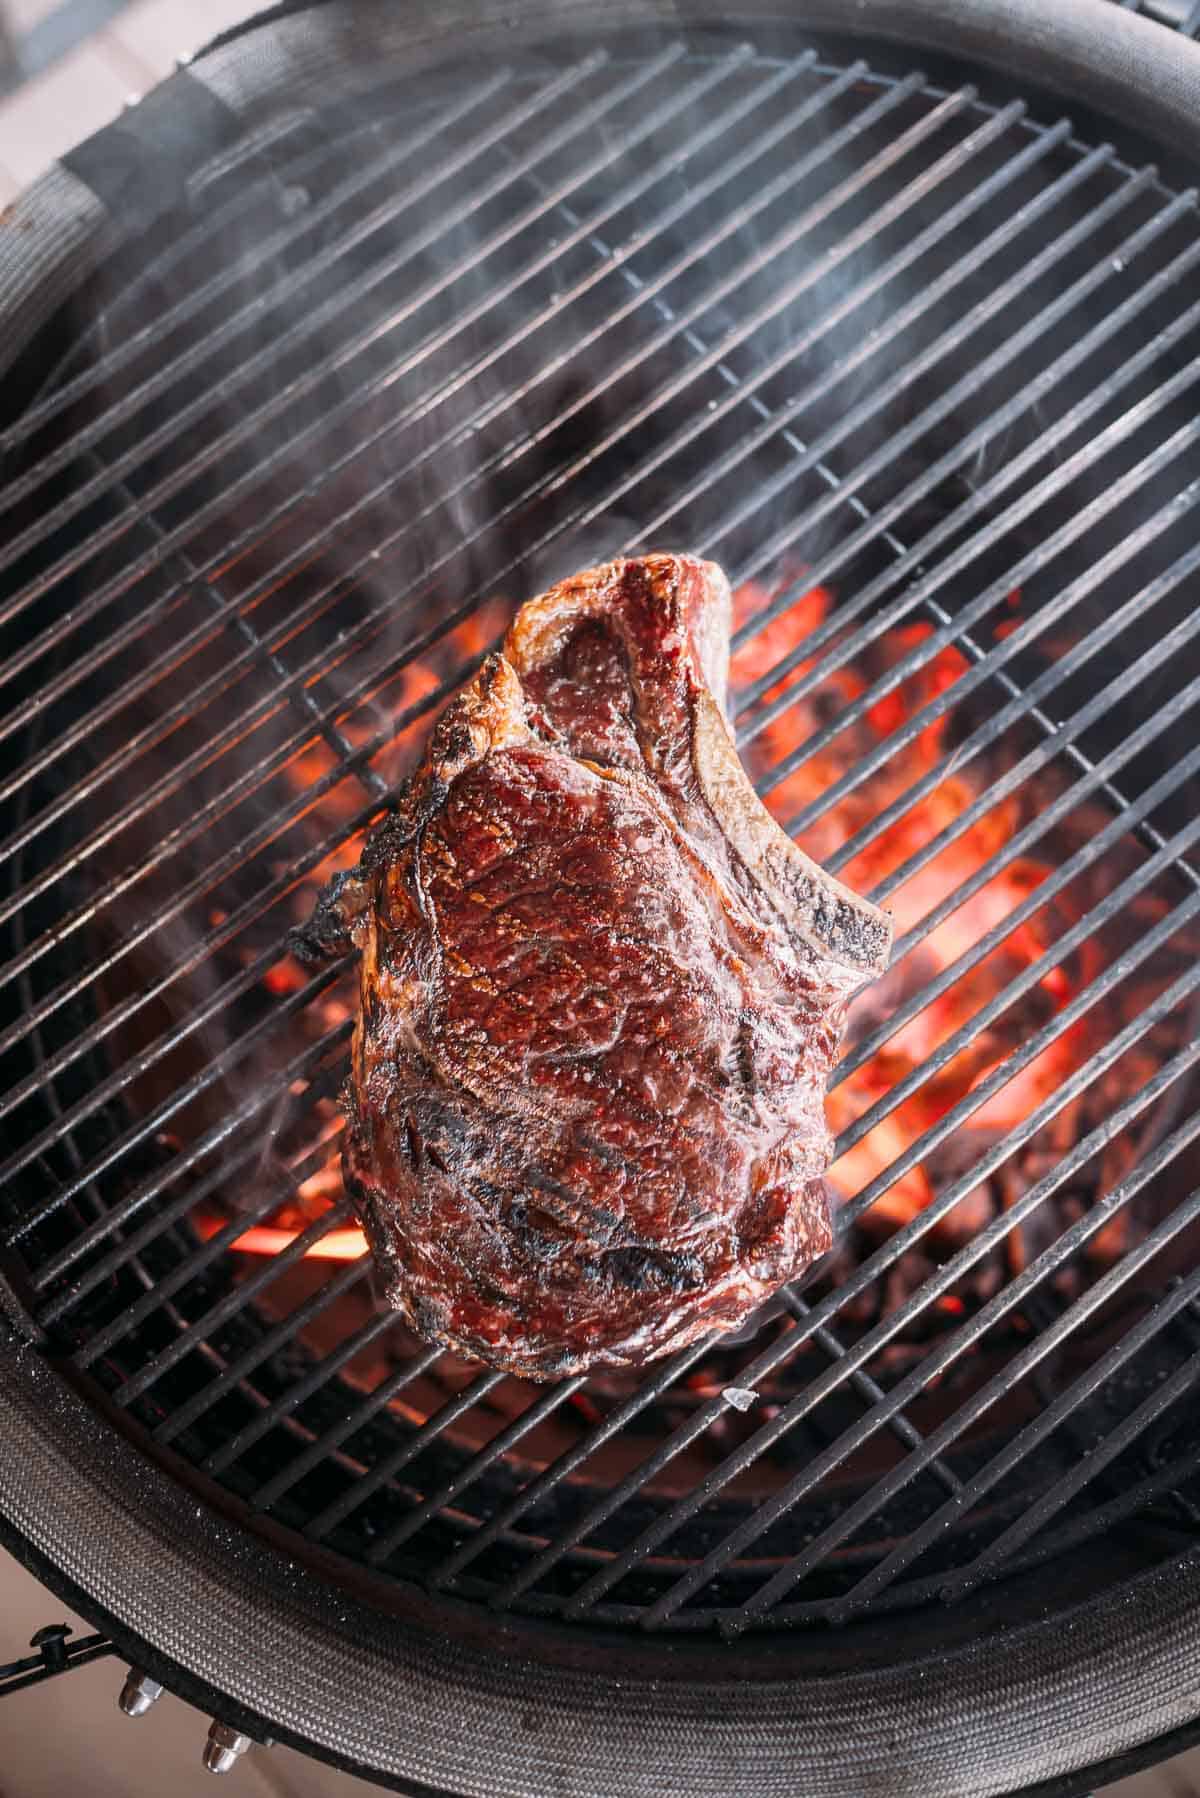 A large steak grilling on an open flame barbecue with visible char marks.